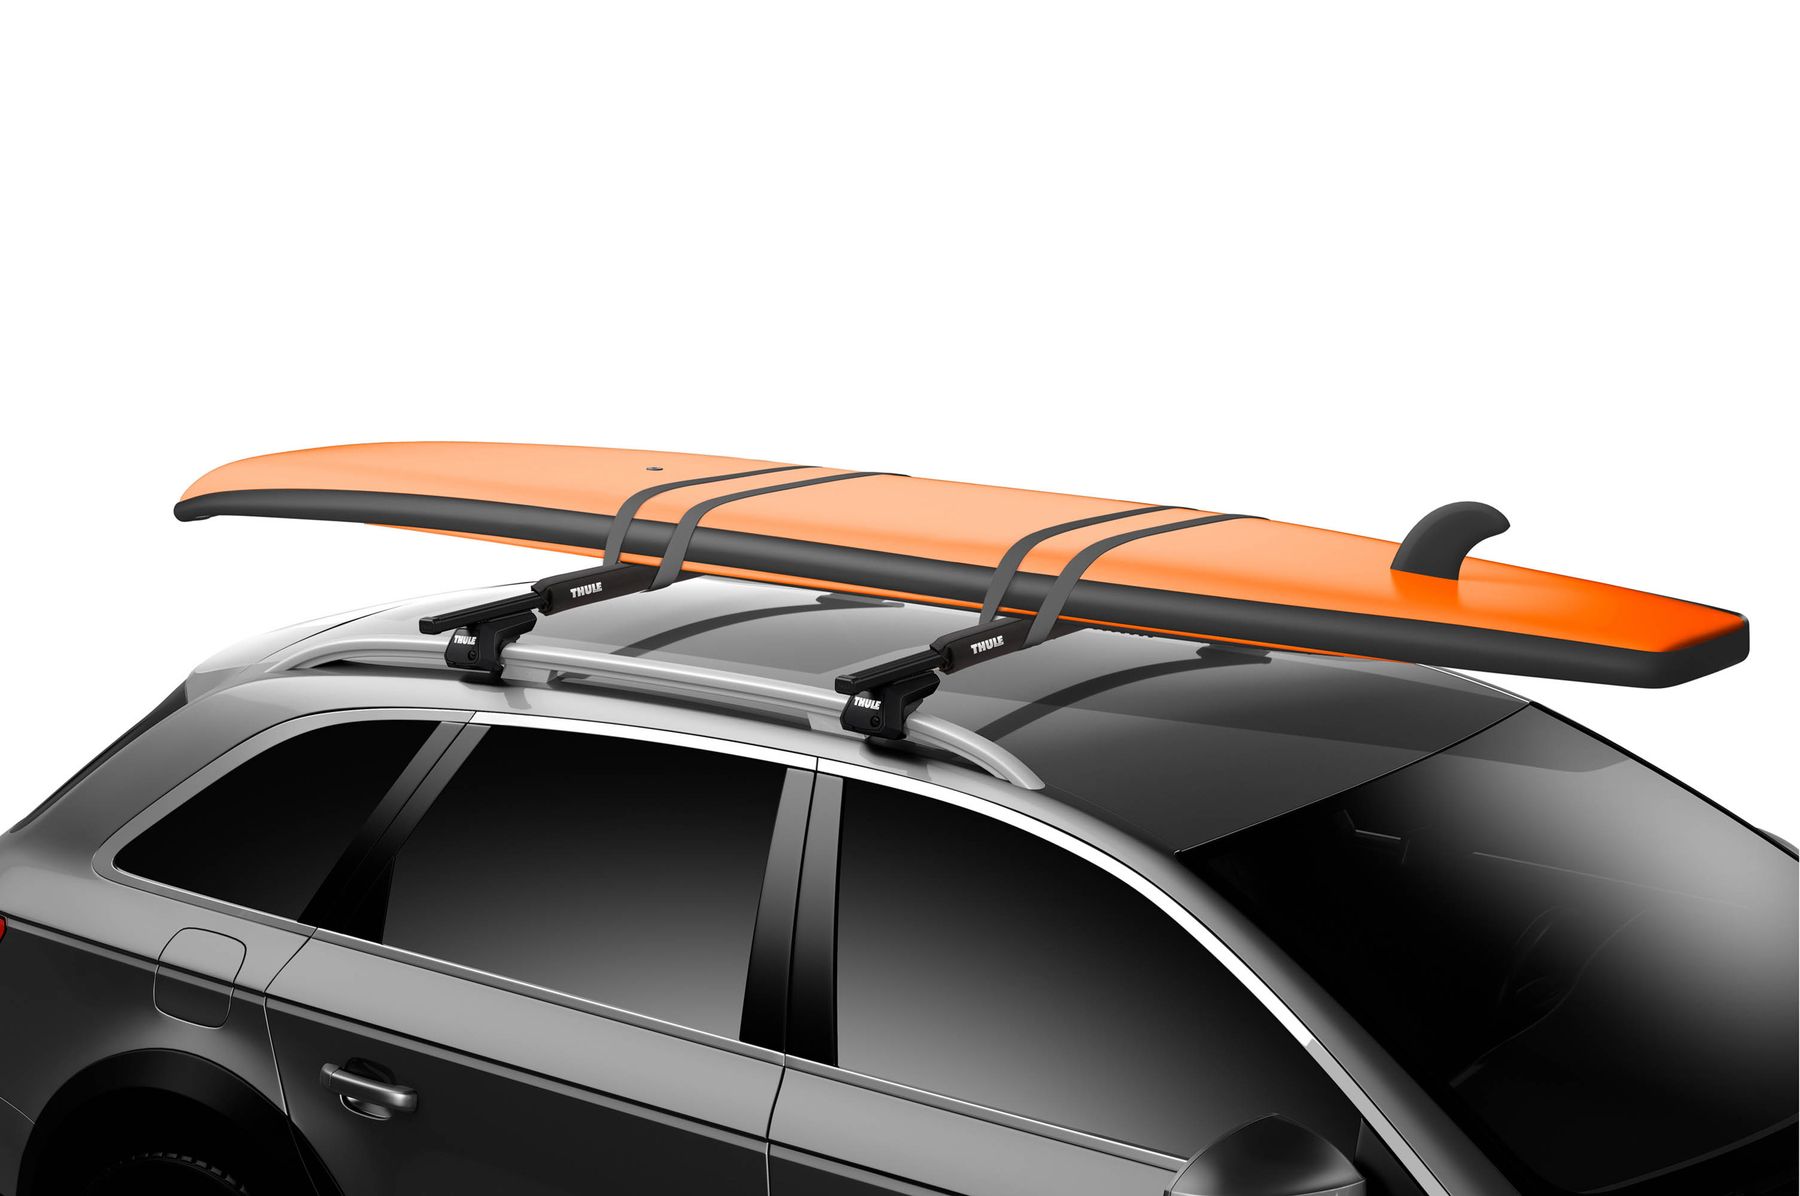 Snowboard Black Arya Life 28 Aero Car Roof Rack Pads with 15 Silicone Buckle Straps for Surfboard Soft Roof Rack Pads and as Wind Deflector Shape Pair SUP Paddleboard 